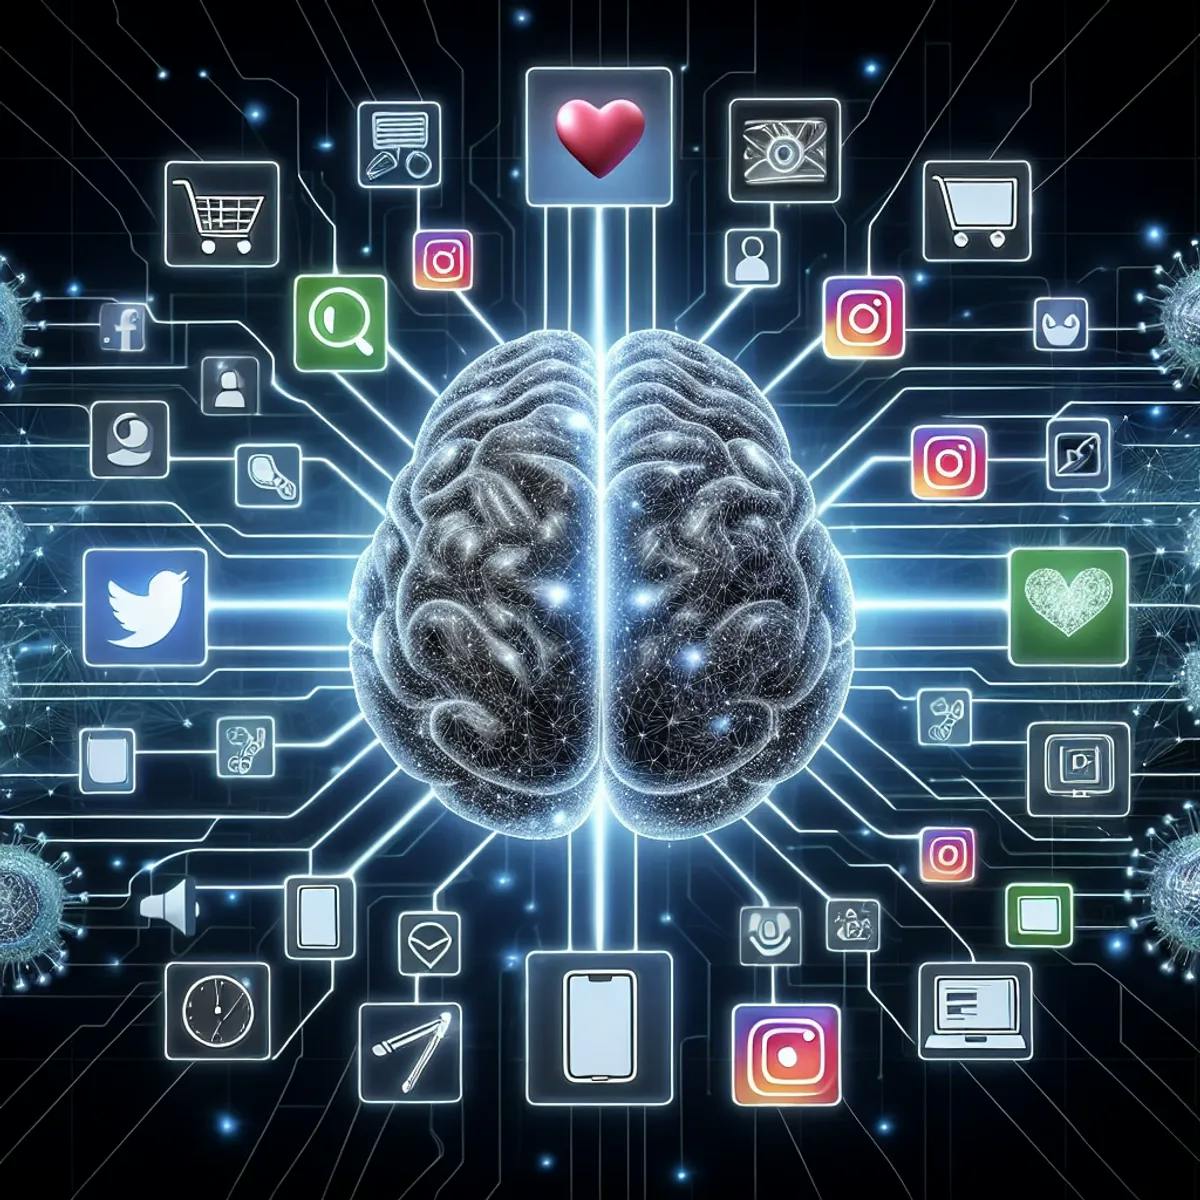 A large brain at the center represents Artificial Intelligence, from which various digital platforms such as social media, e-commerce, and blogging are radiating.